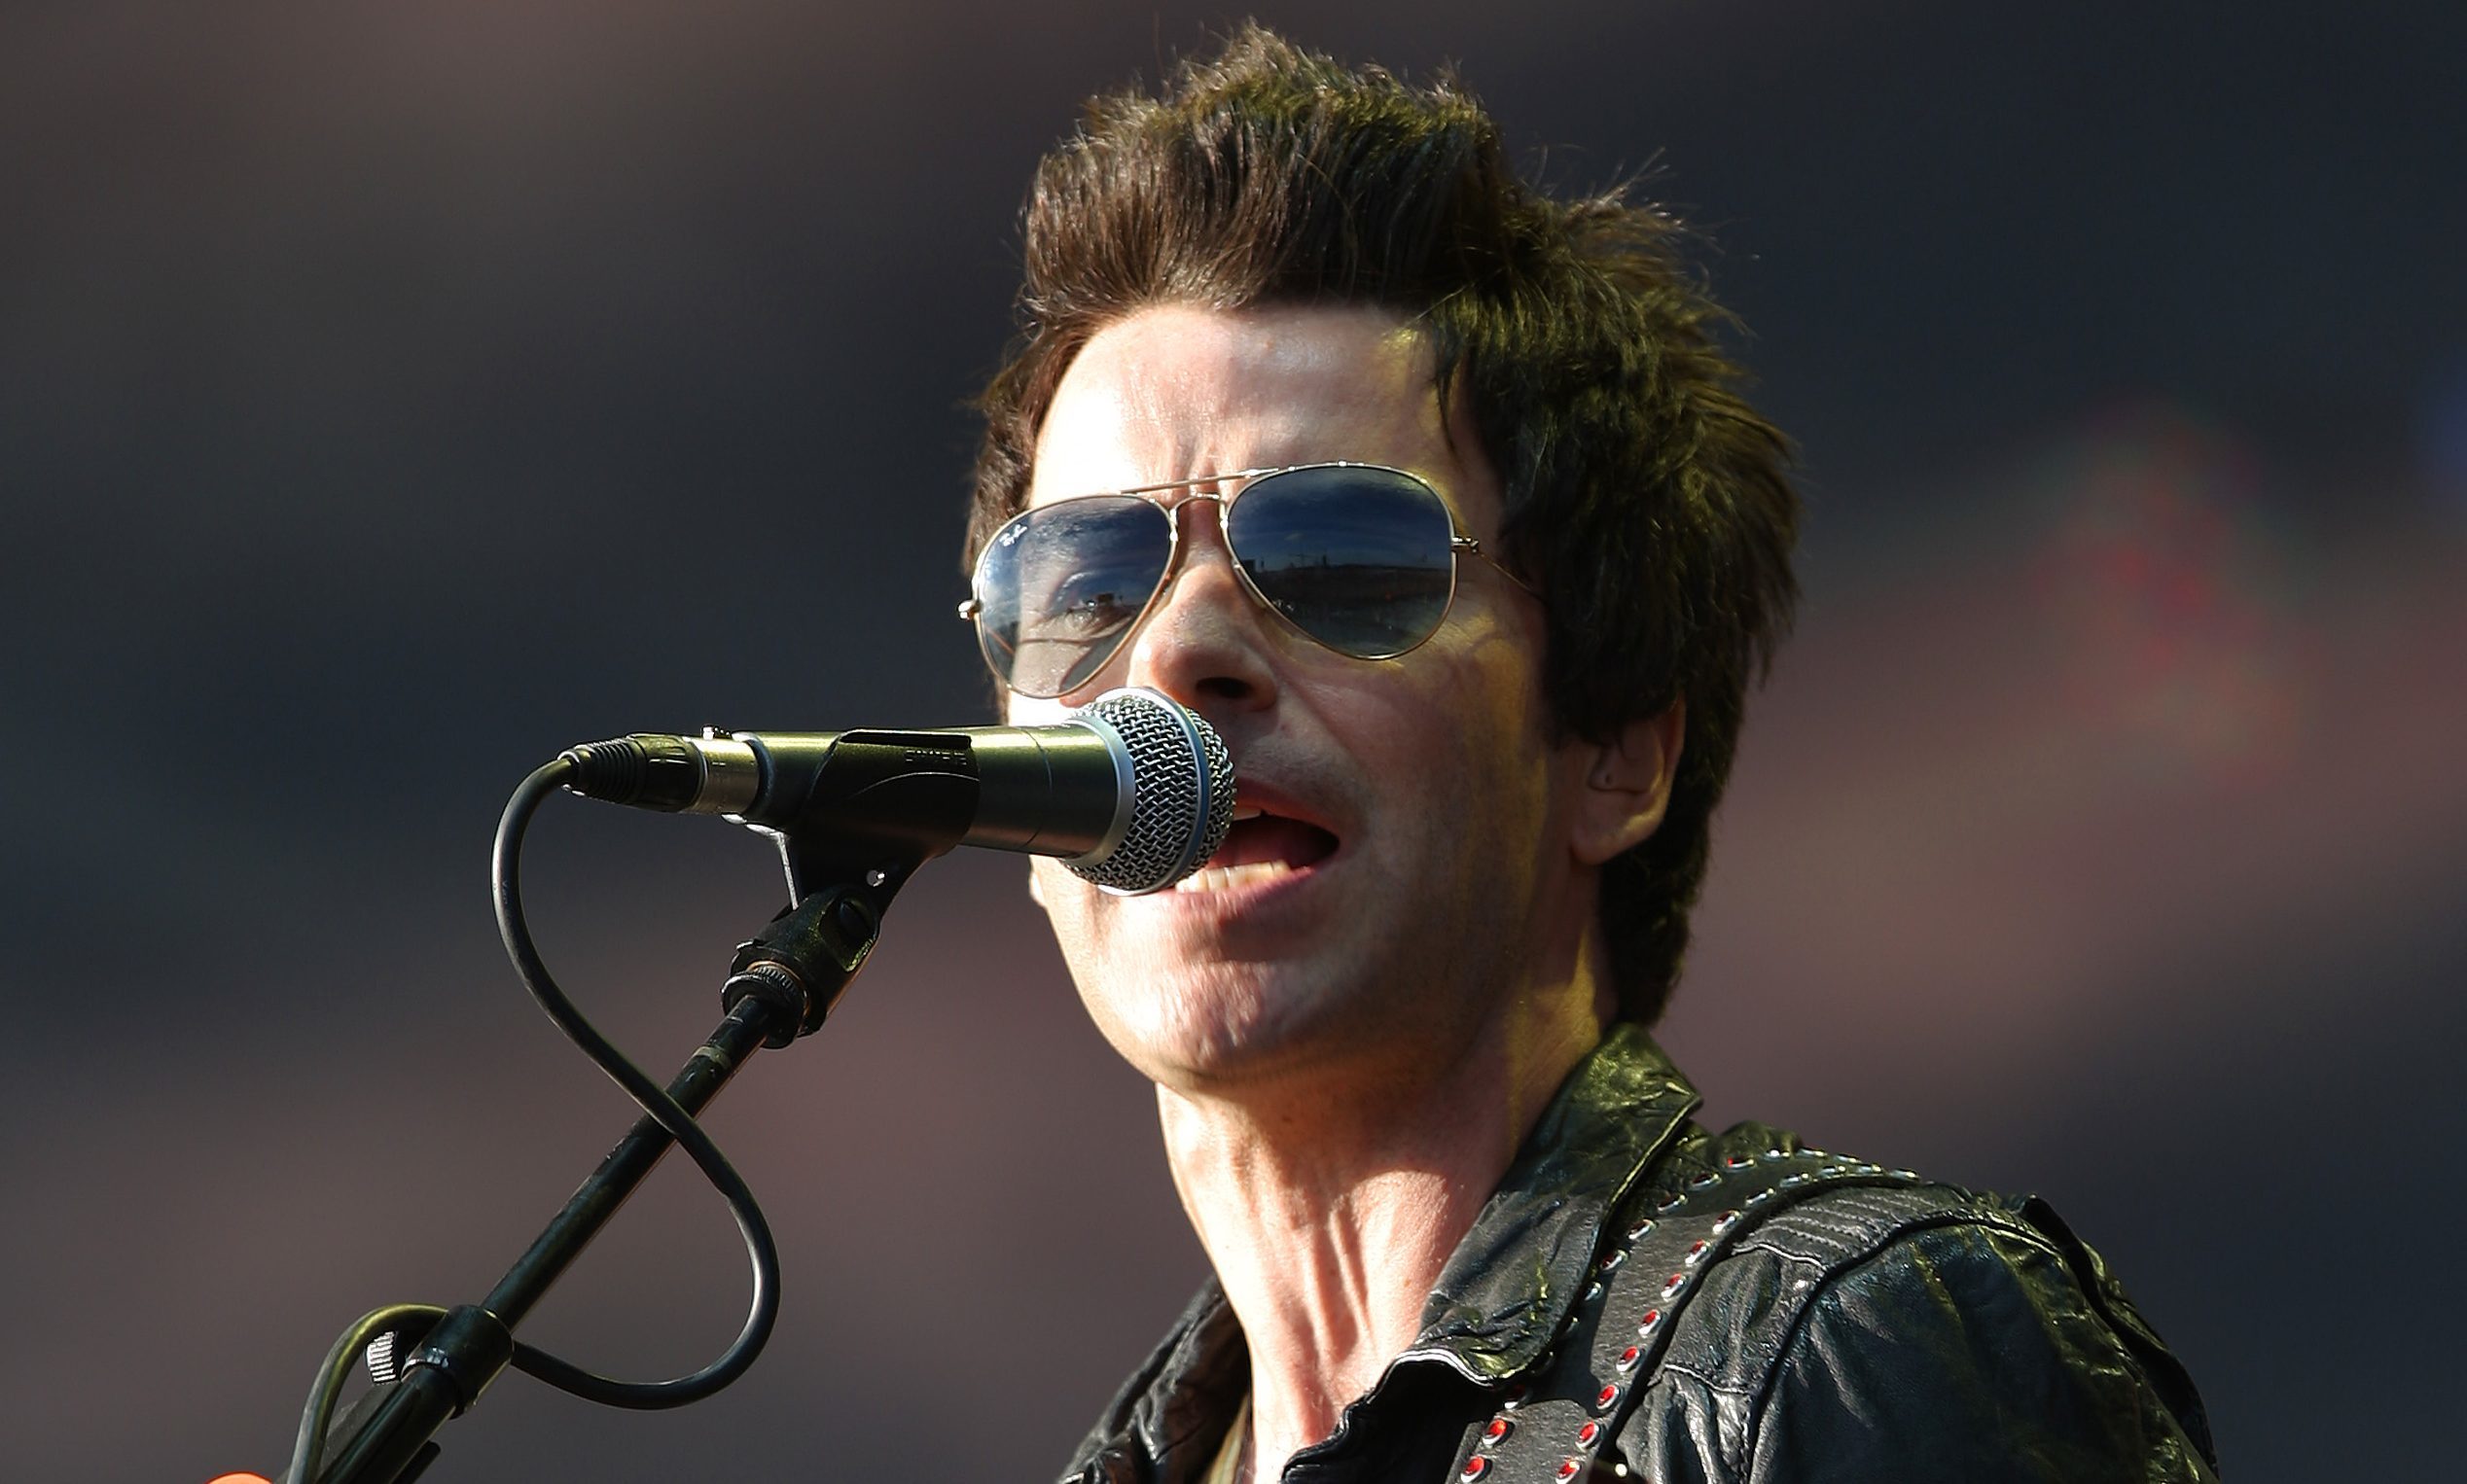 Stereophonics' Kelly Jones at T in the Park.